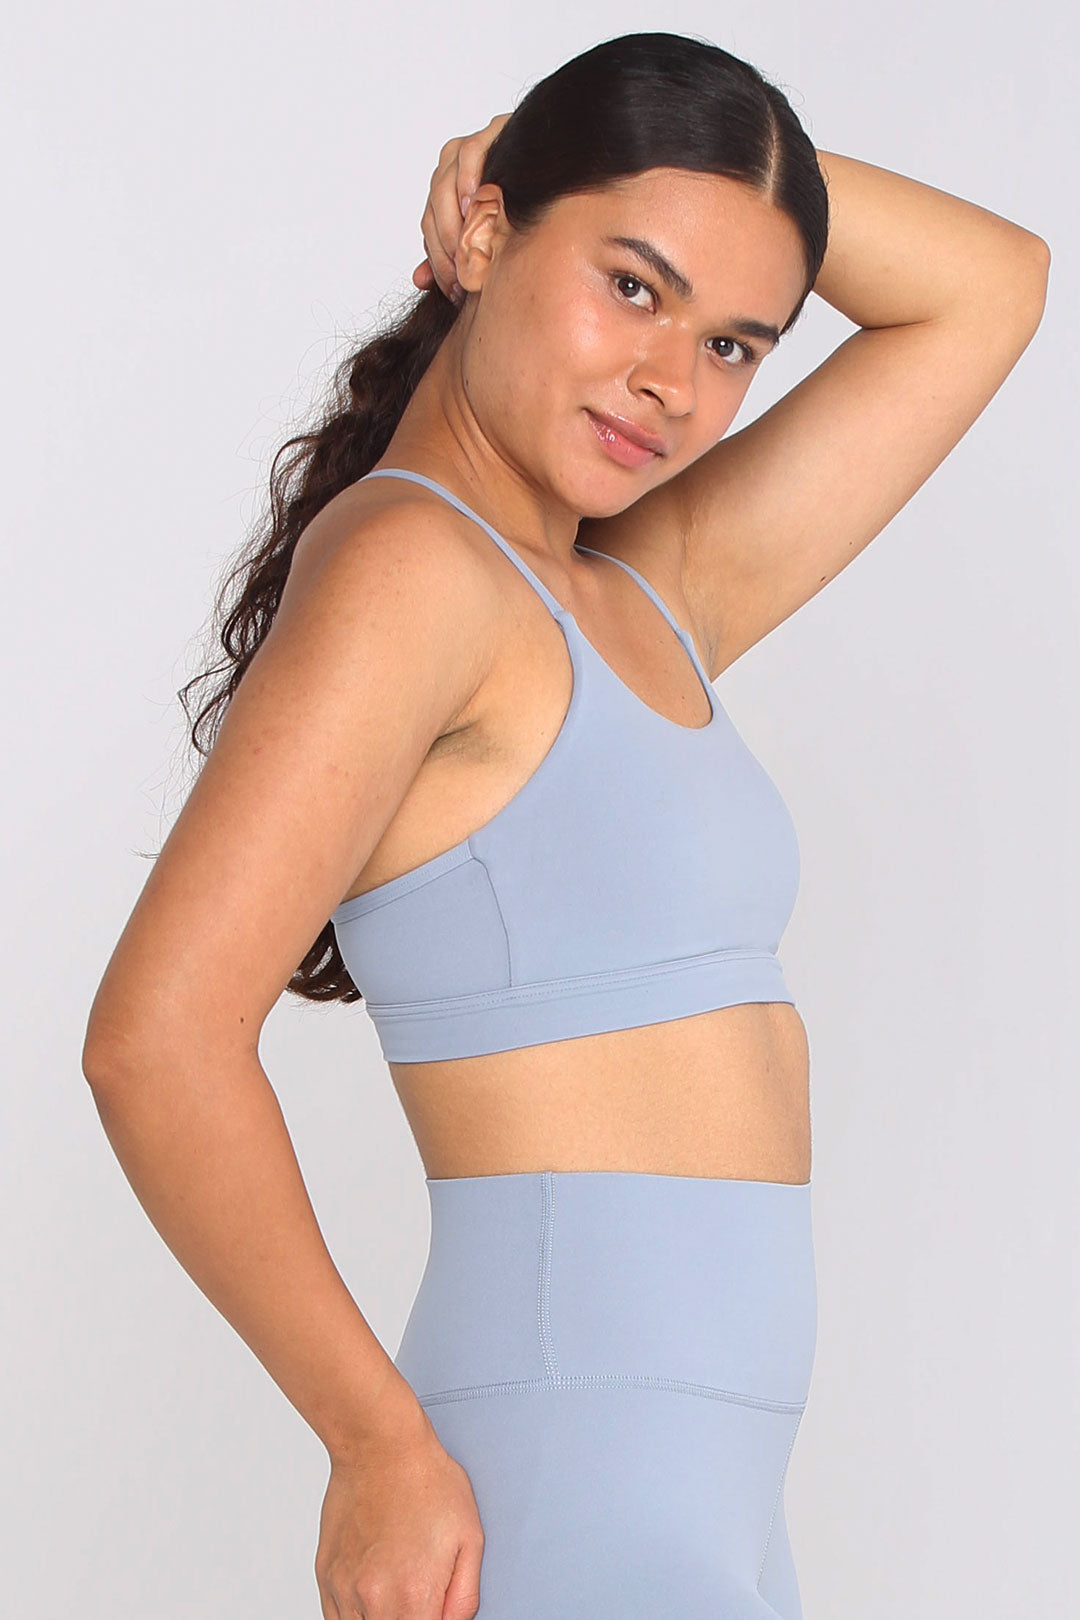 Women's Light-support Padded Strappy Sports Bra – Rexing